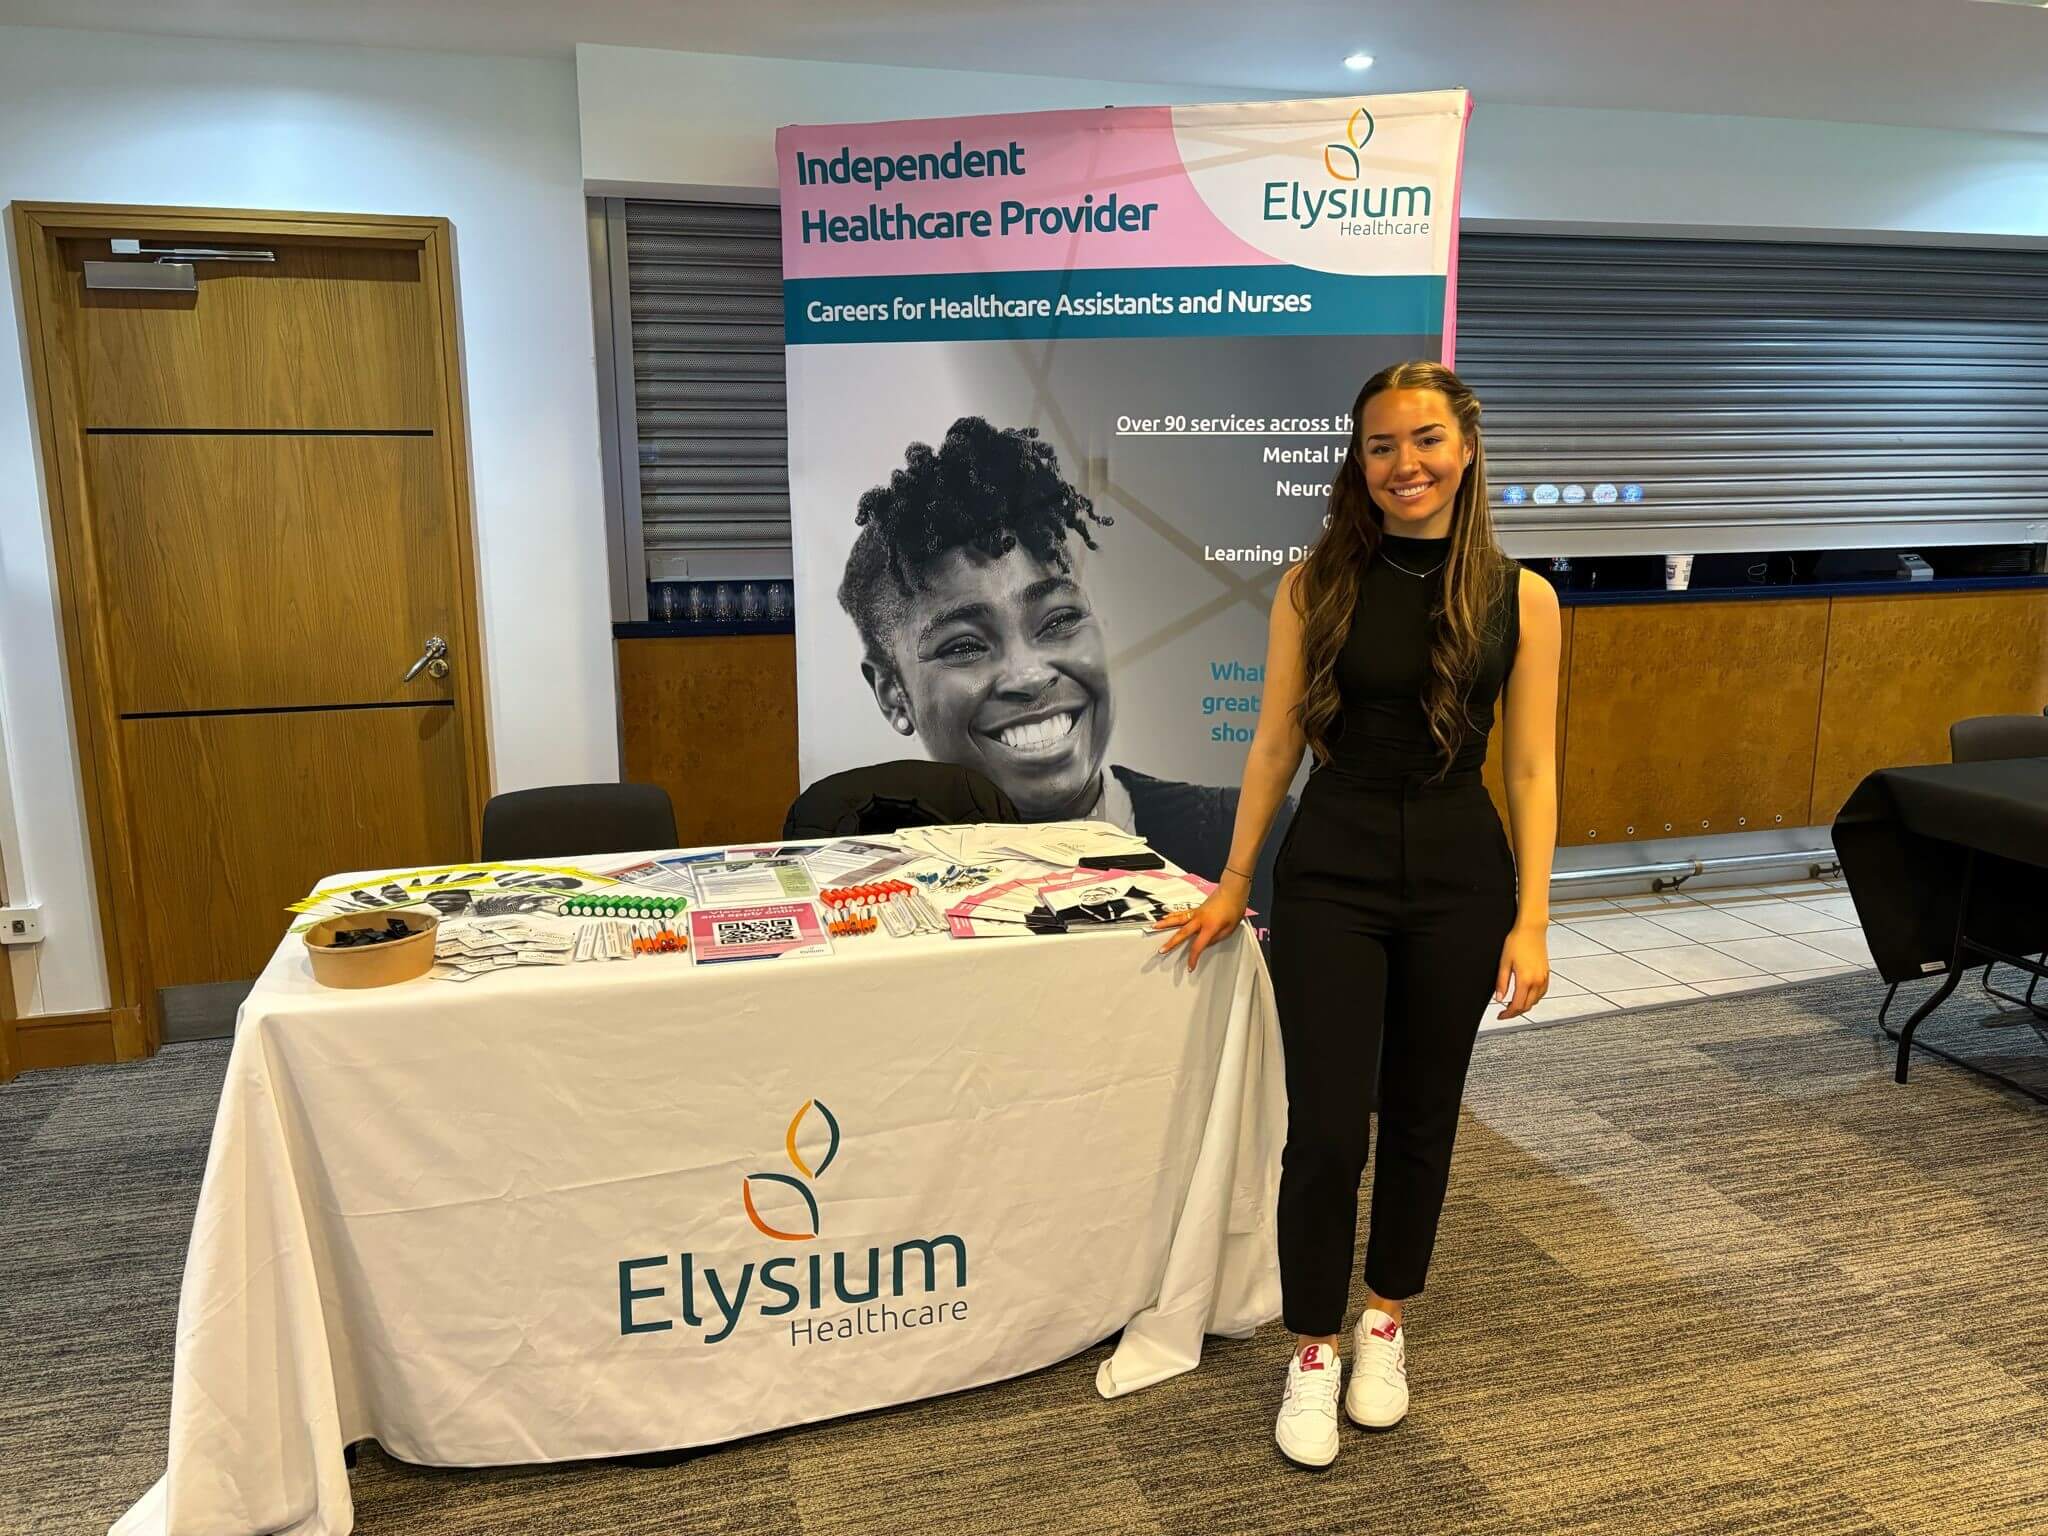 Elysium Healthcare at our event in Ipswich